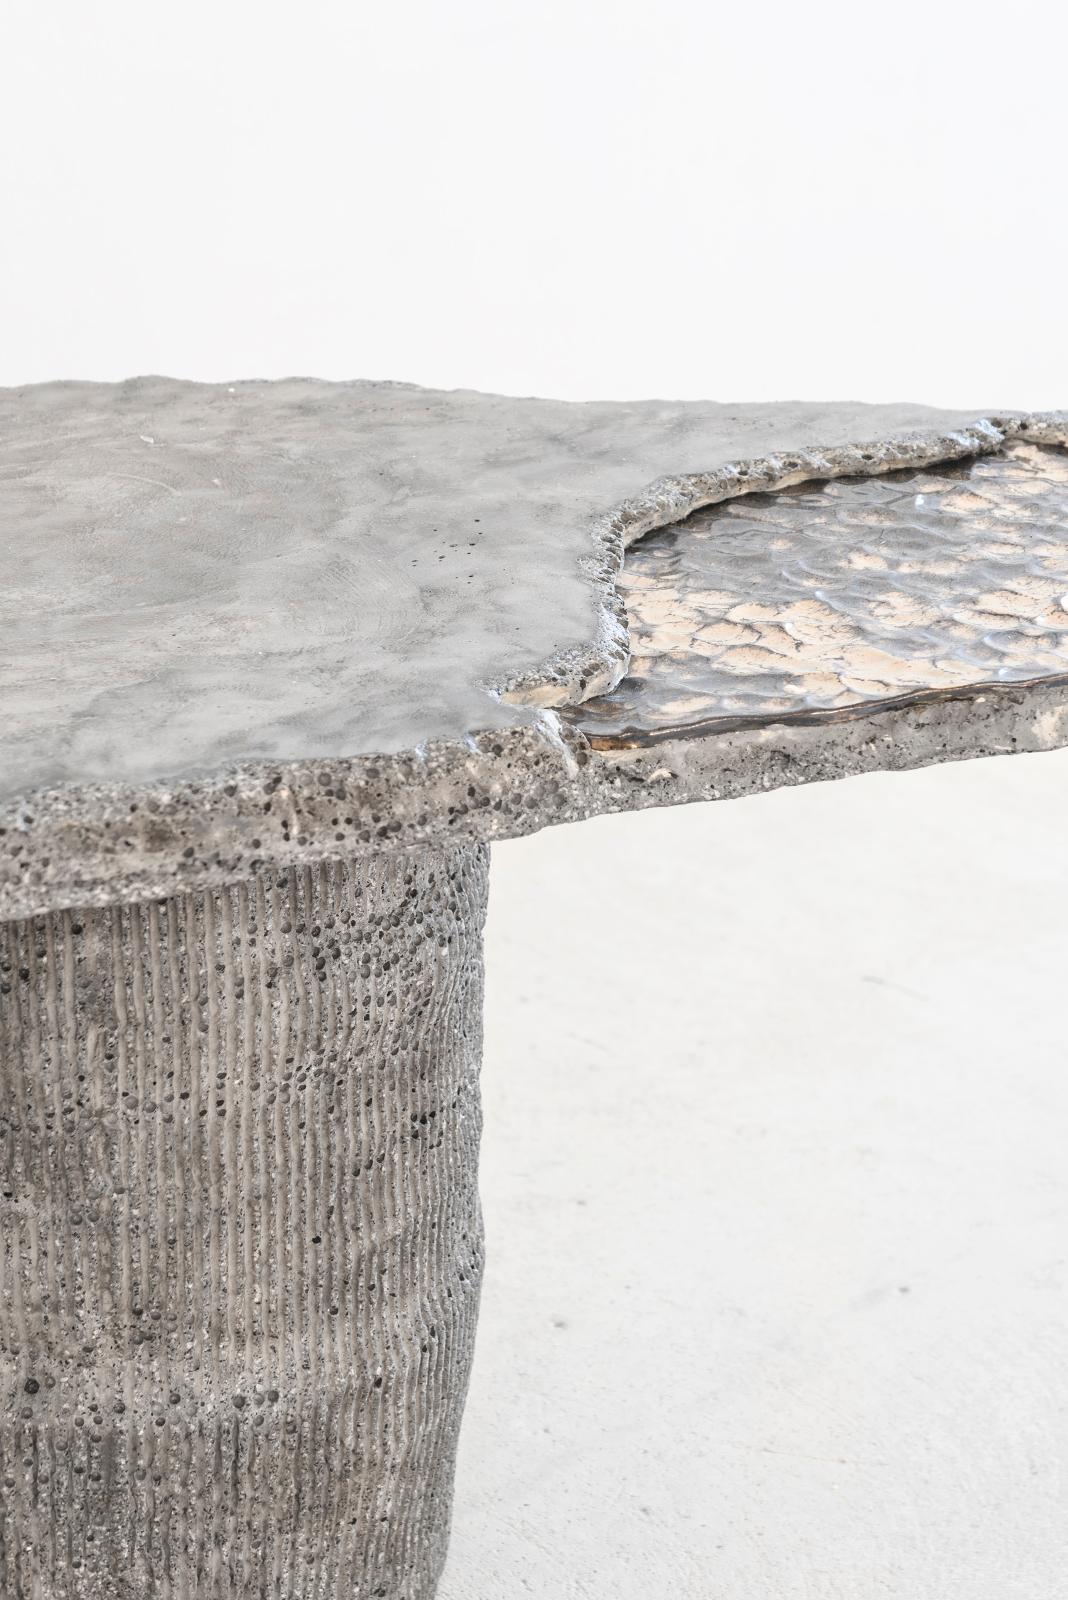 Rodrigo Pinto
Oval side table
From the series “Tierras Hipnóticas” (Hypnopompic lands)
Manufactured by Rodrigo Pinto
Santiago de Chile, 2020
Produced in exclusive for side gallery
Concrete consisting of marble grains, stone carbonates, copper